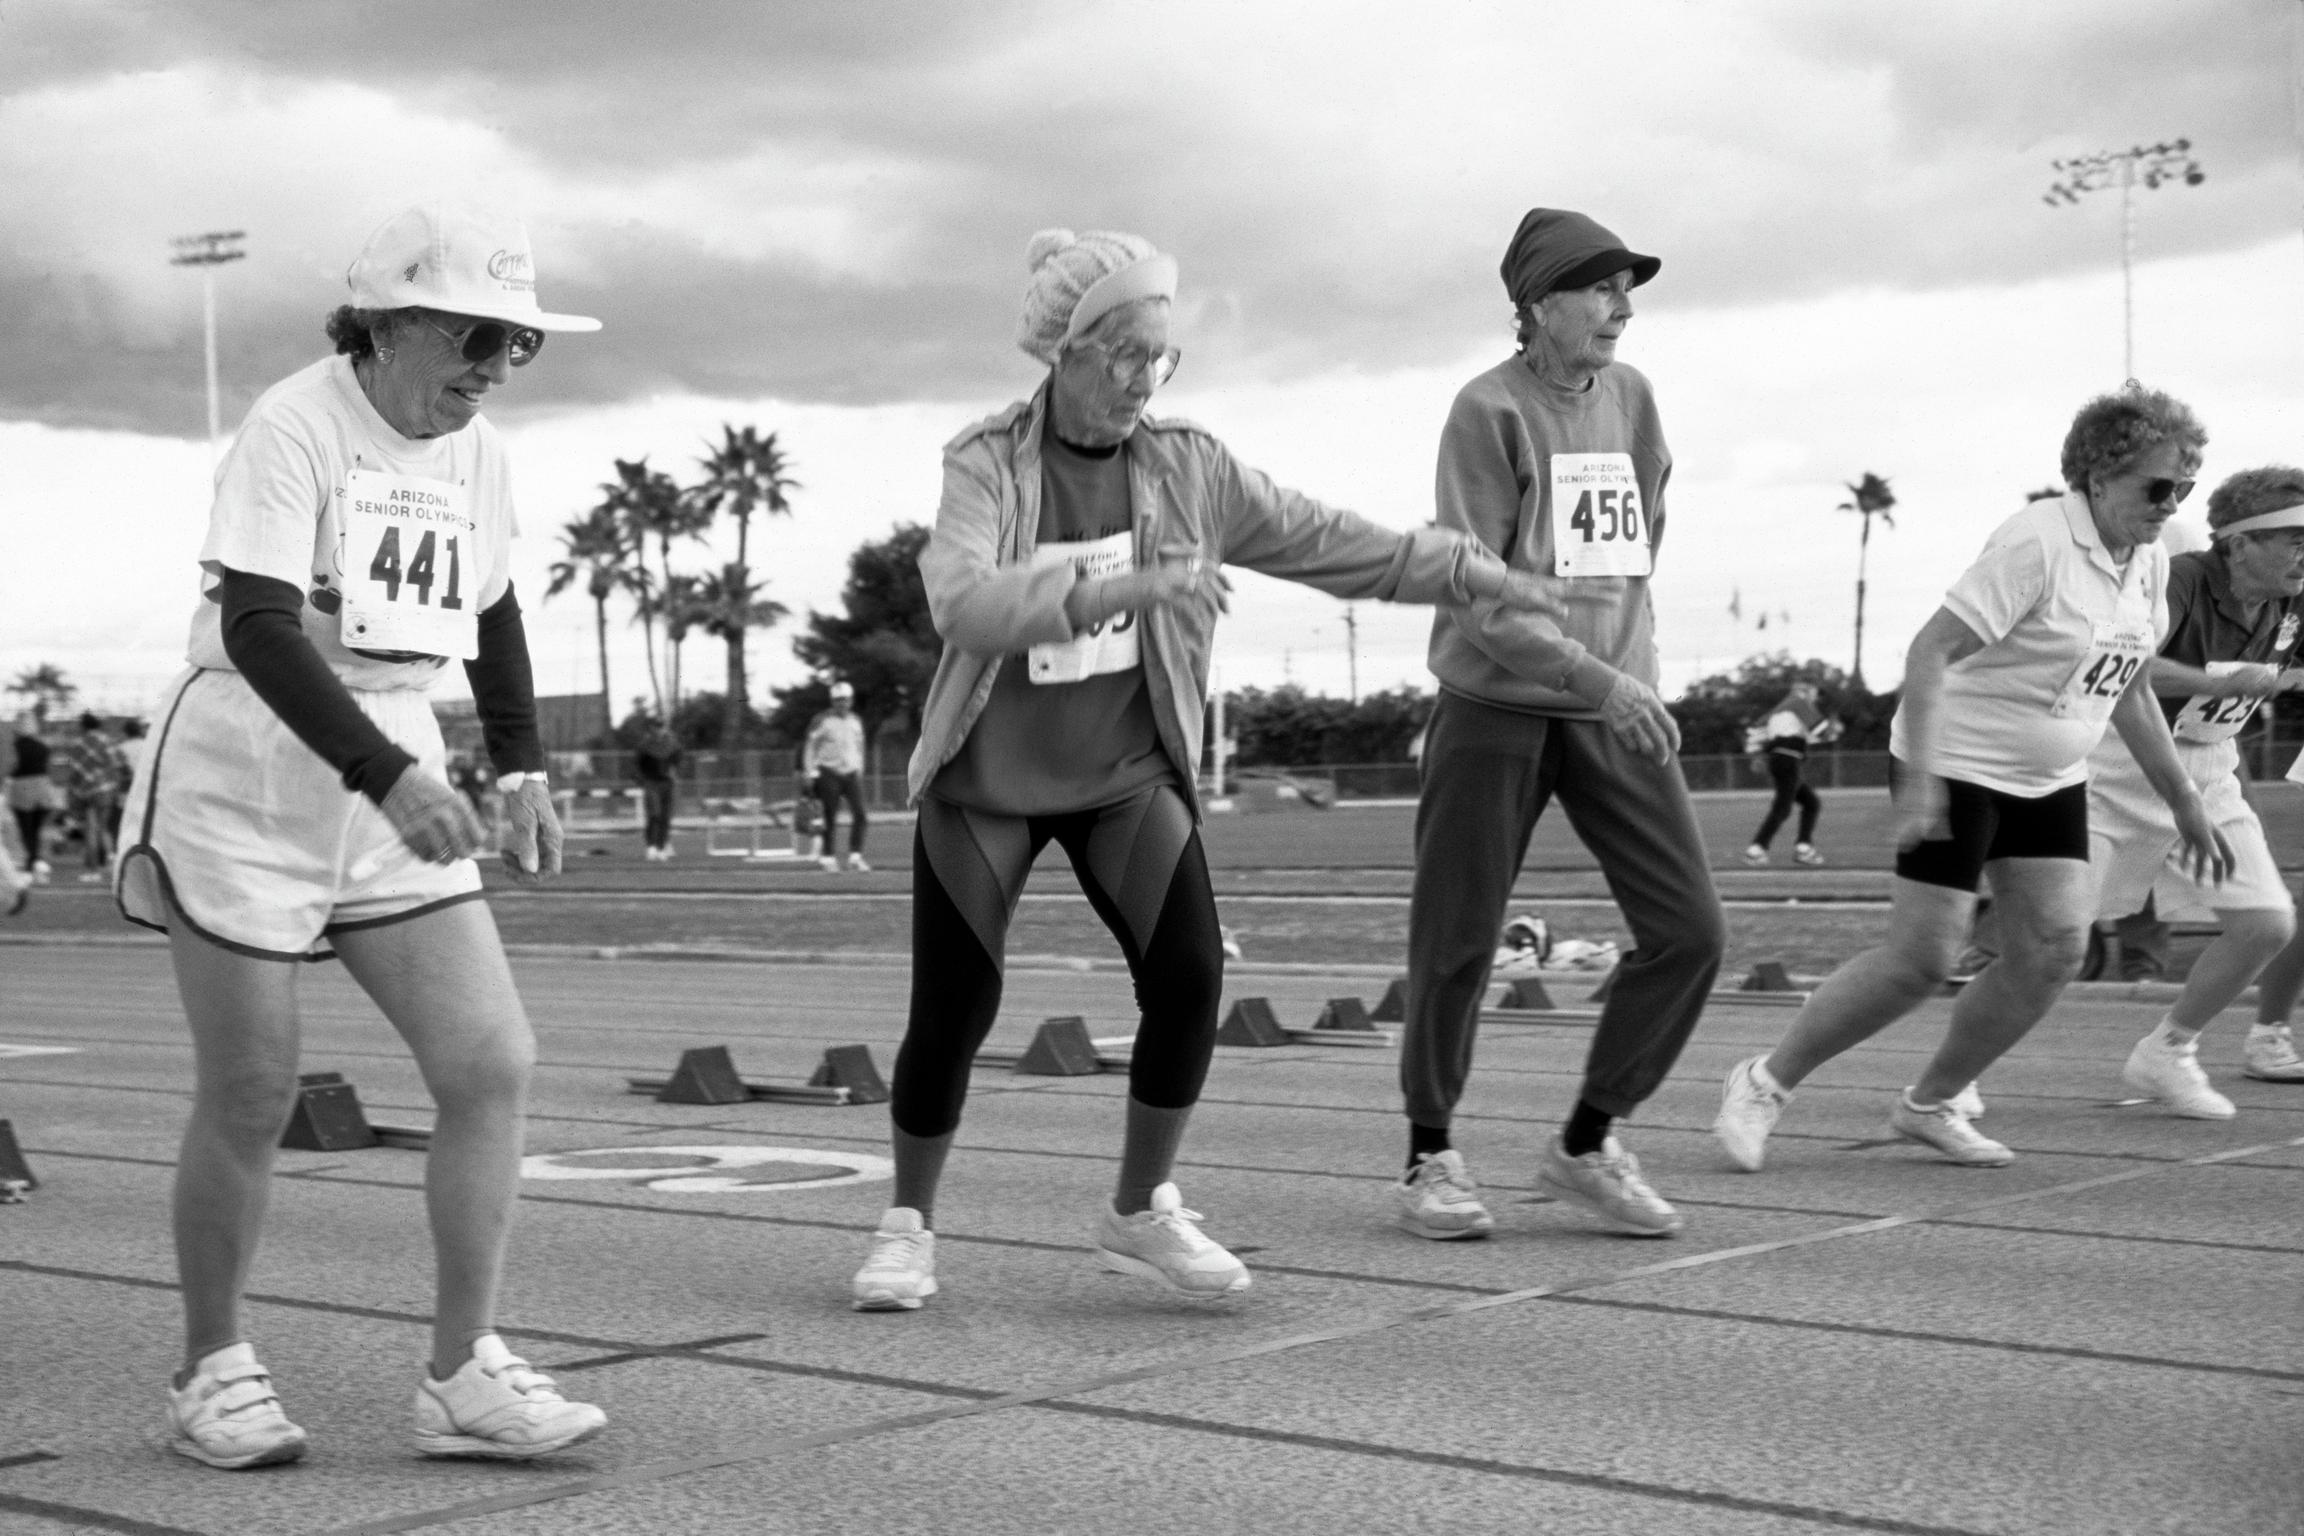 Senior Olympics. Women runners at the start of a race during the track day at the Olympics. Phoenix, Arizona USA